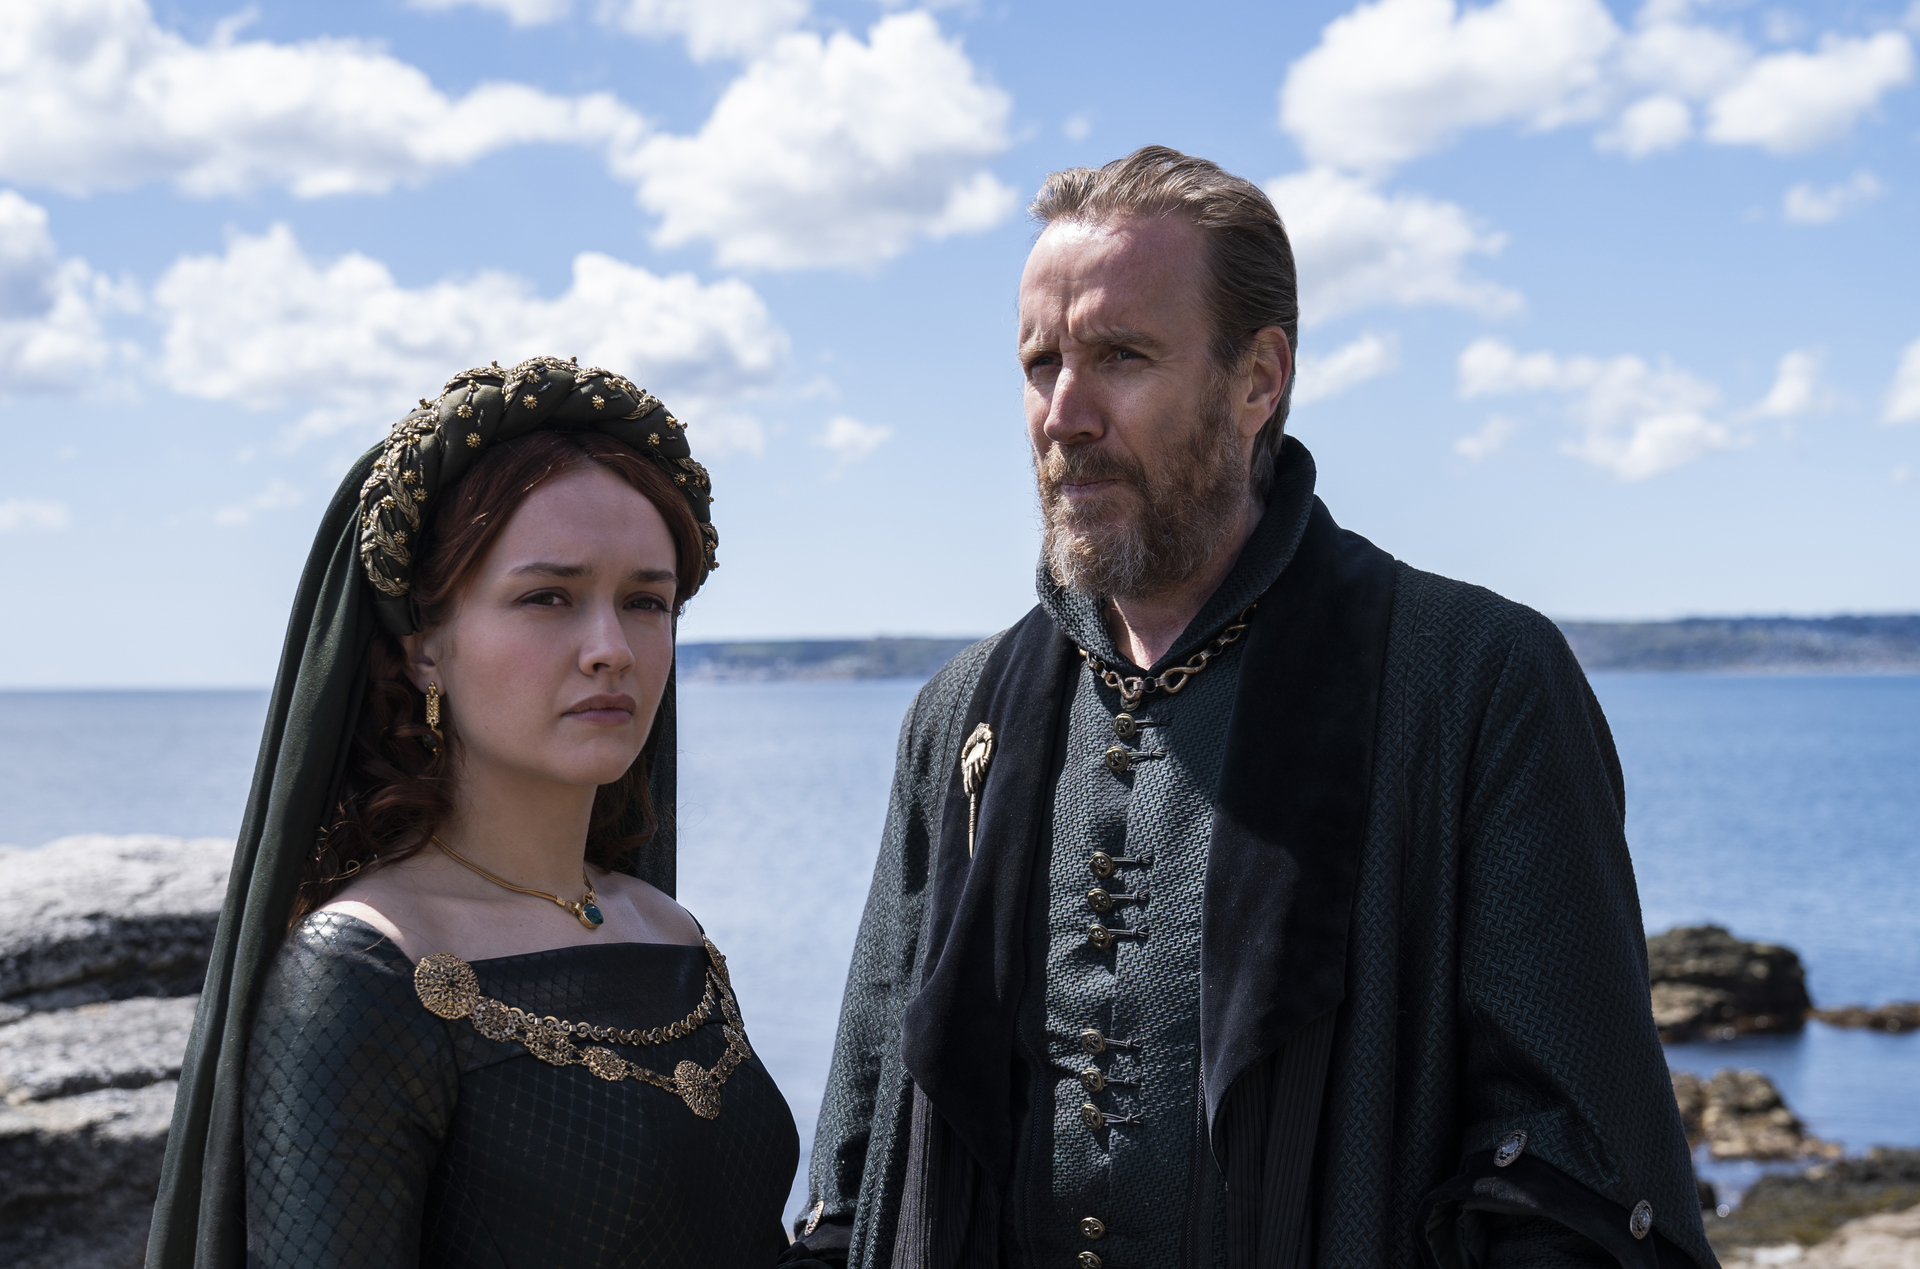 Olivia Cooke as “Alicent Hightower” and Rhys Ifans as “Otto Hightower” in House of the Dragon